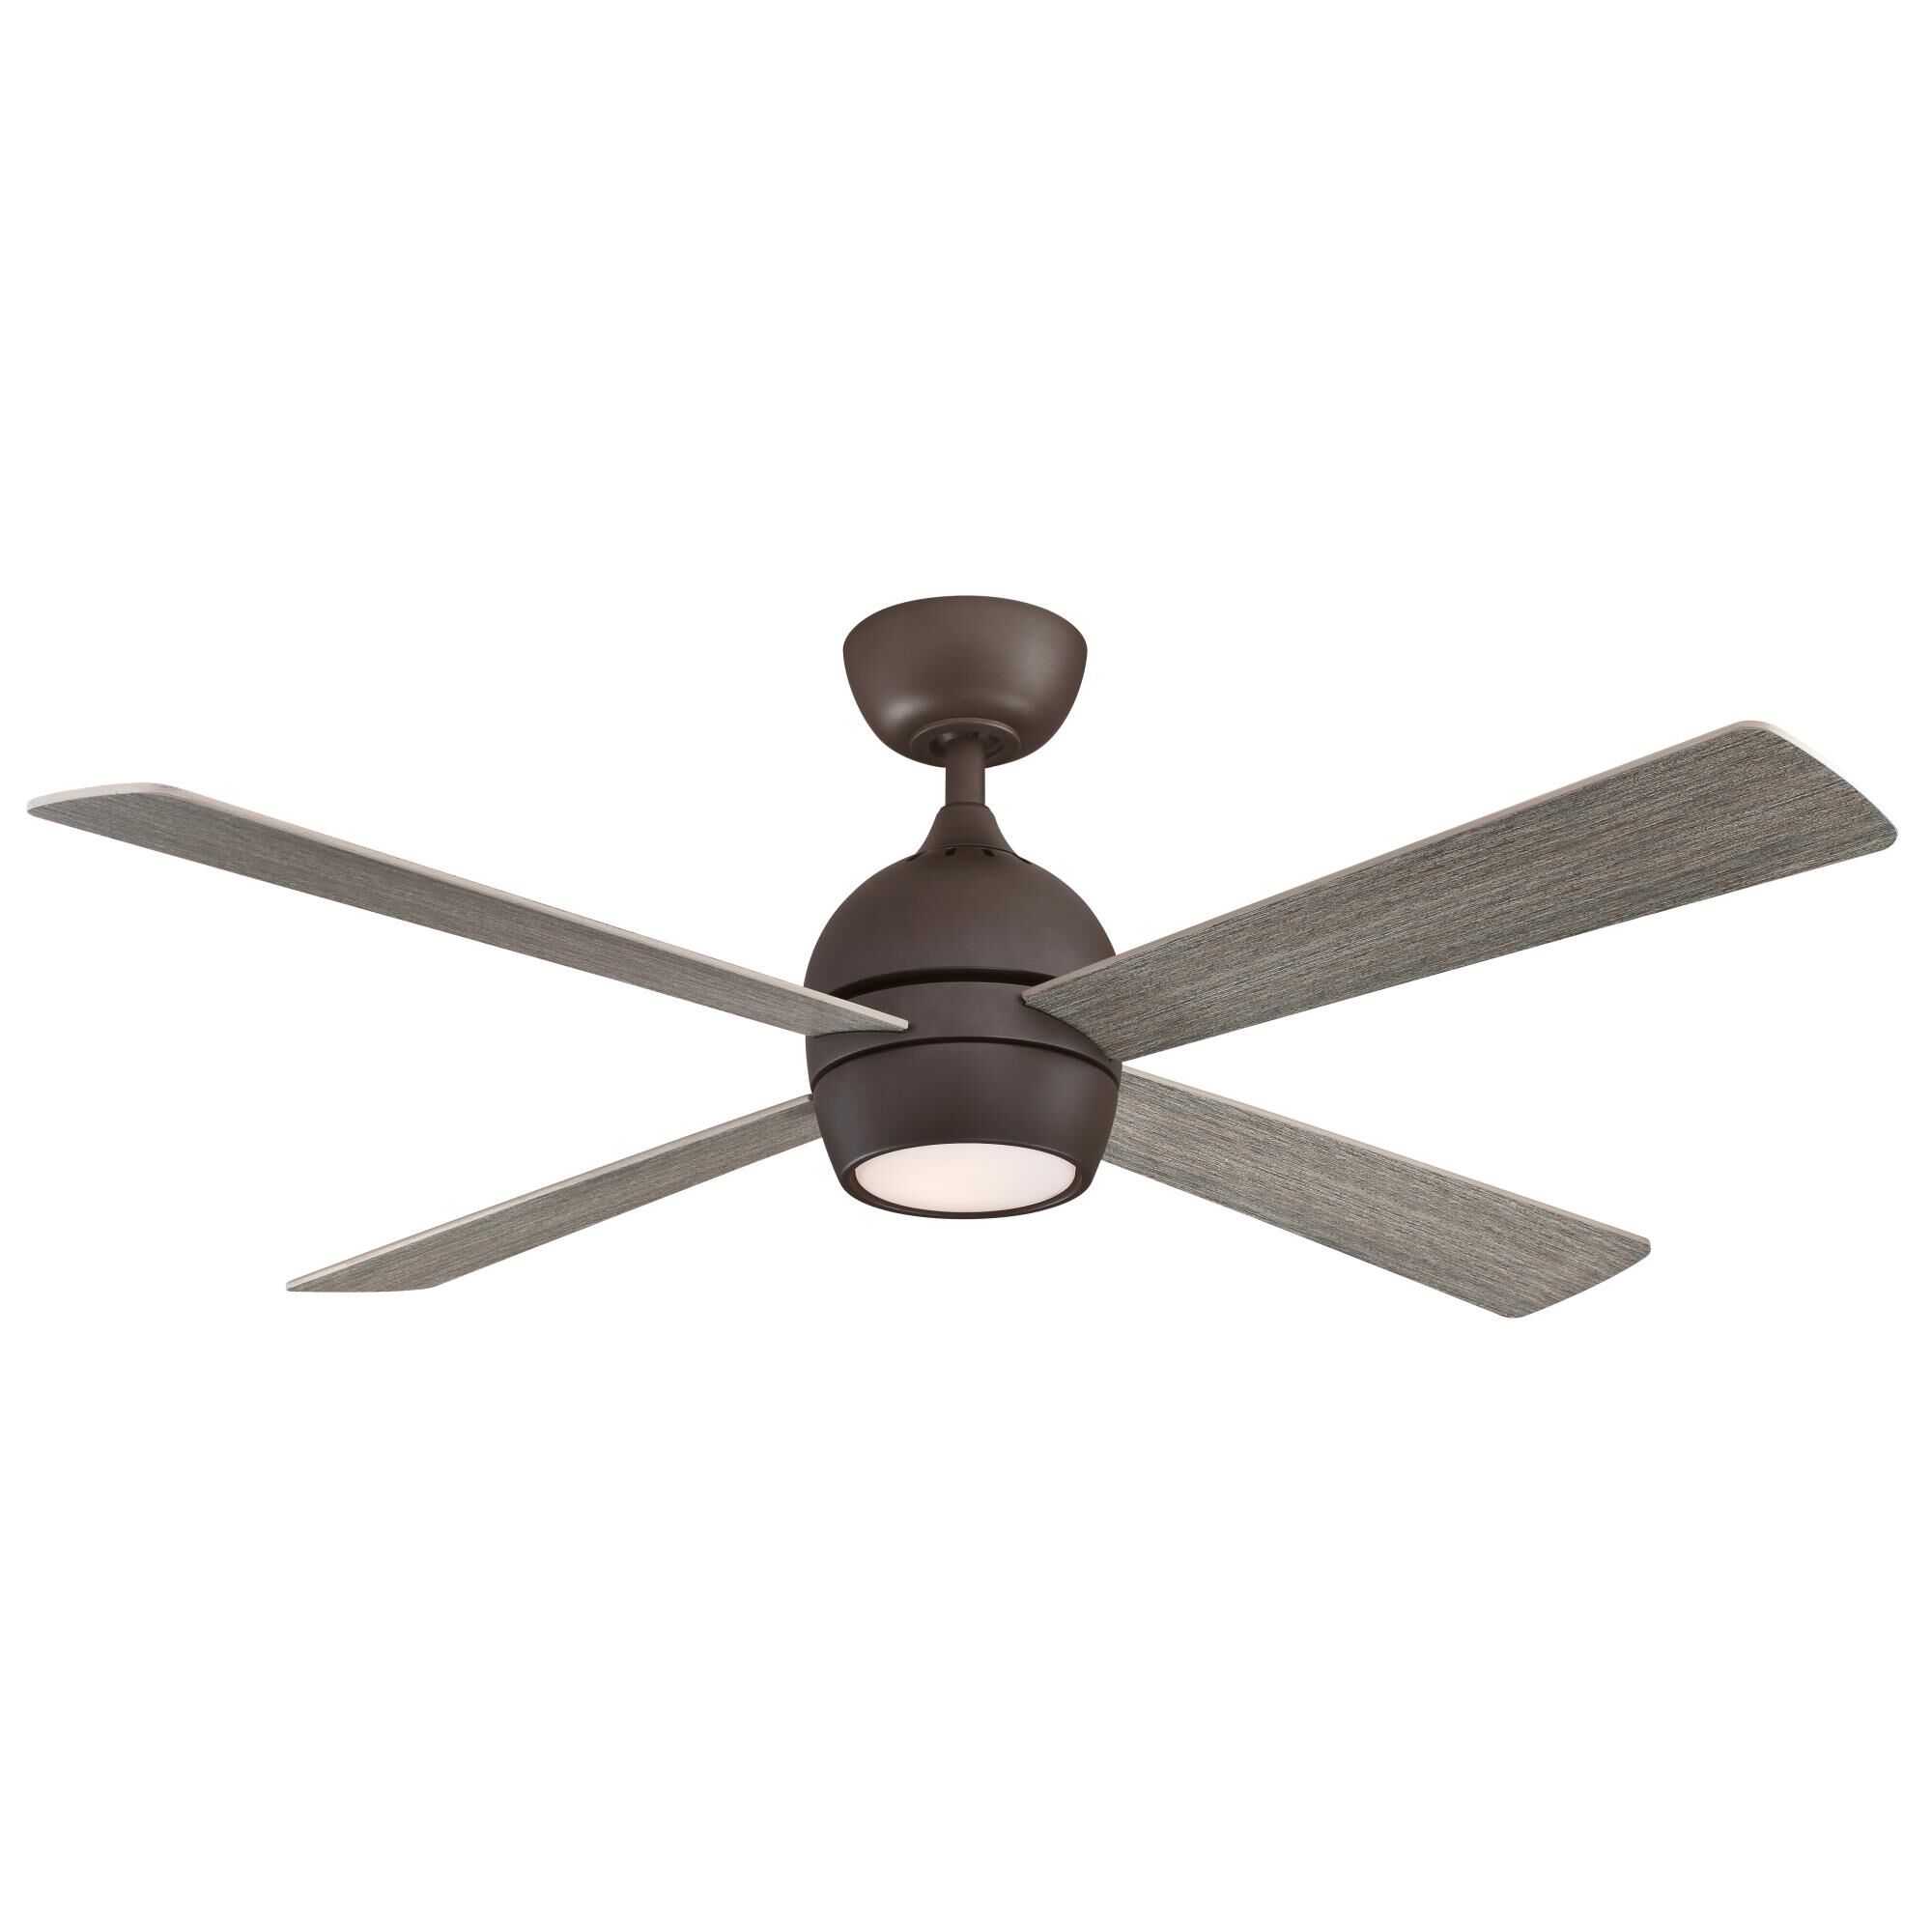 Photos - Fan imation Kwad 52 Inch Ceiling  with Light Kit Kwad - FP7652GR - Moder